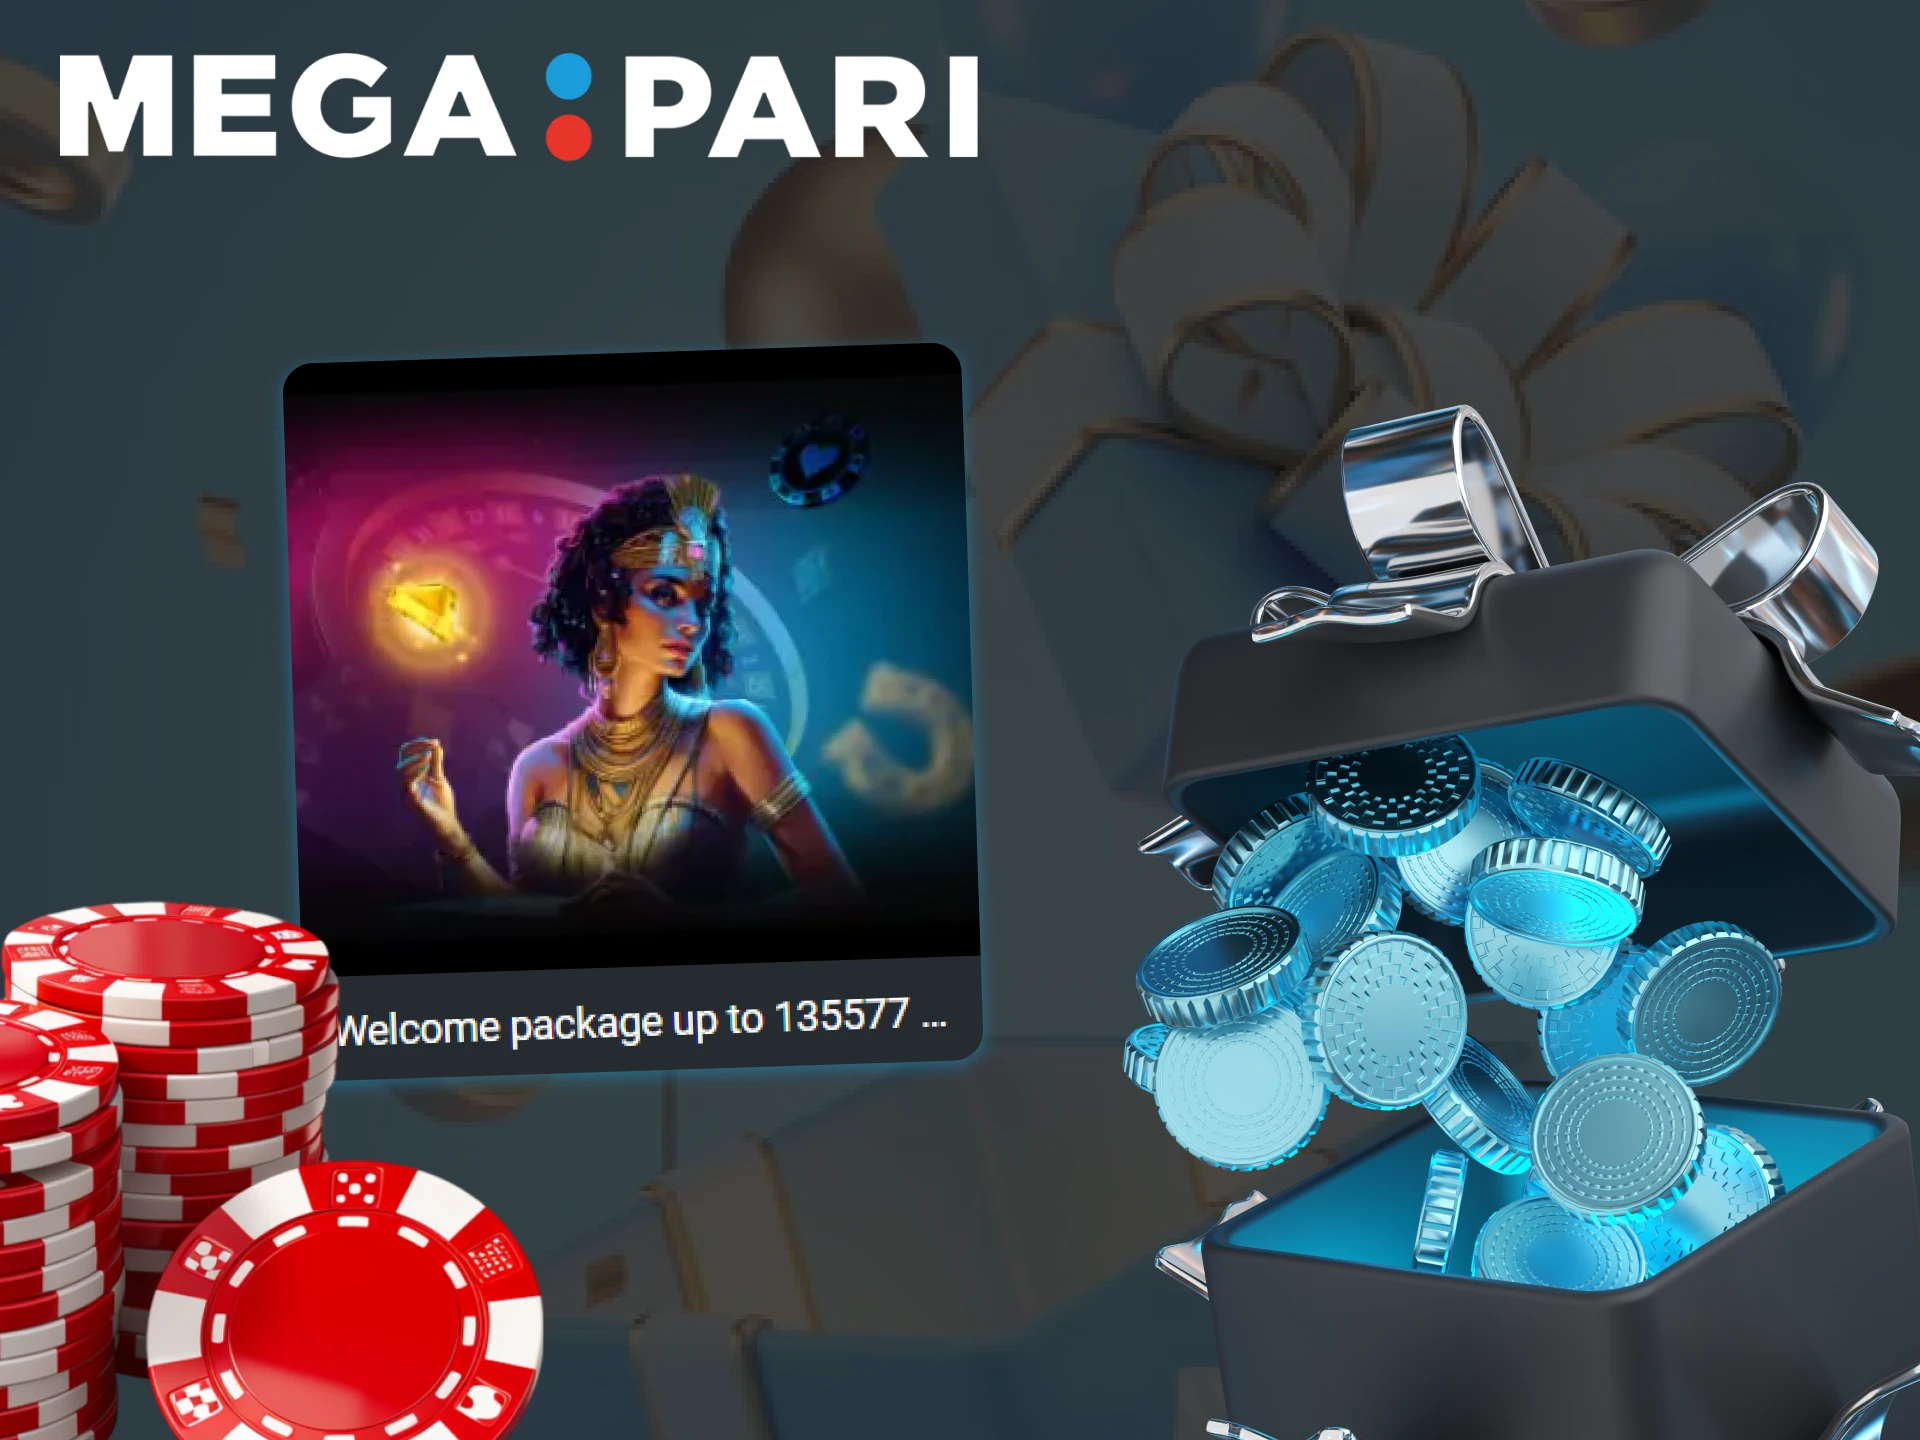 For fans of casino games, Megapari offers a generous welcome bonus on the first four deposits, as well as 150 free spins.